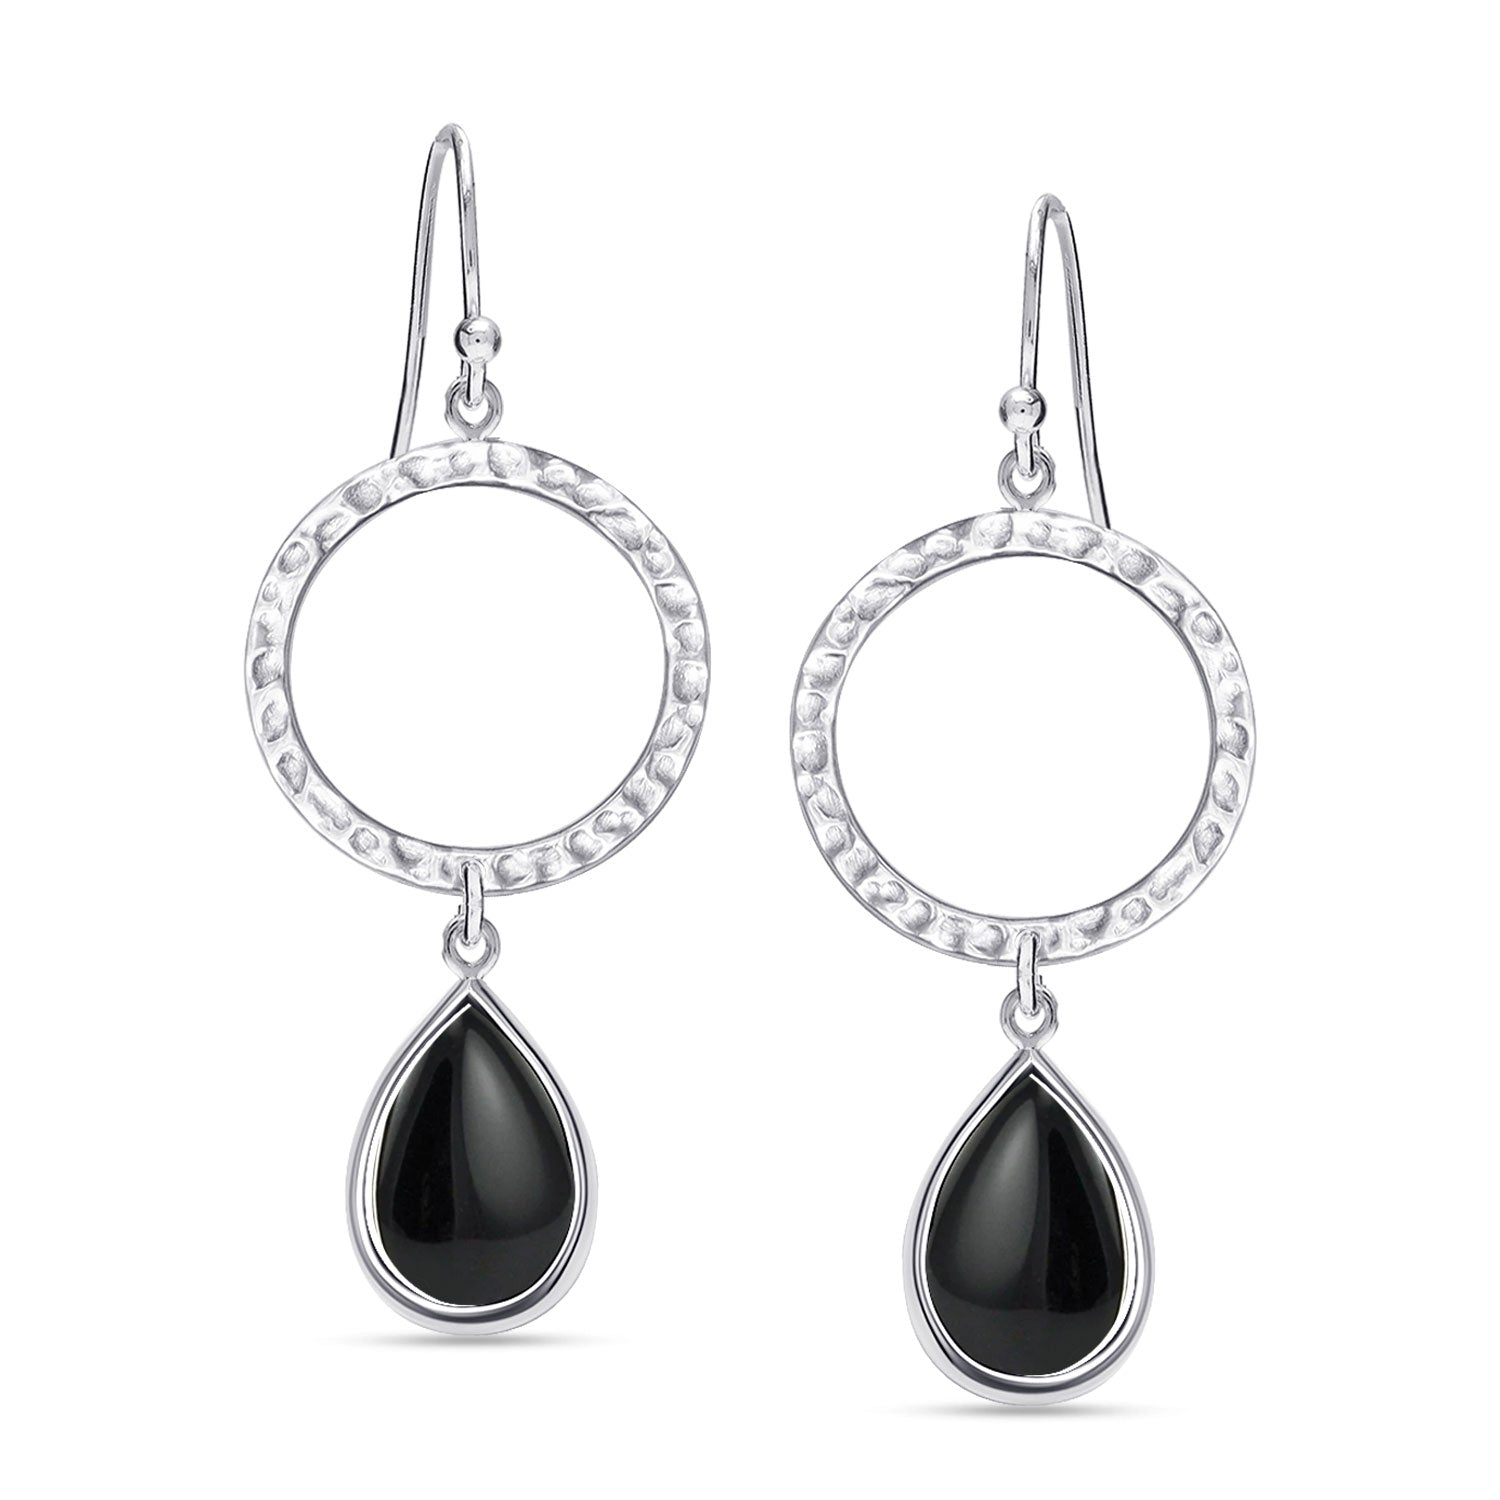 925 Sterling Silver Textured Open Circle Natural Black Onyx Drop Dangle Earrings for Women